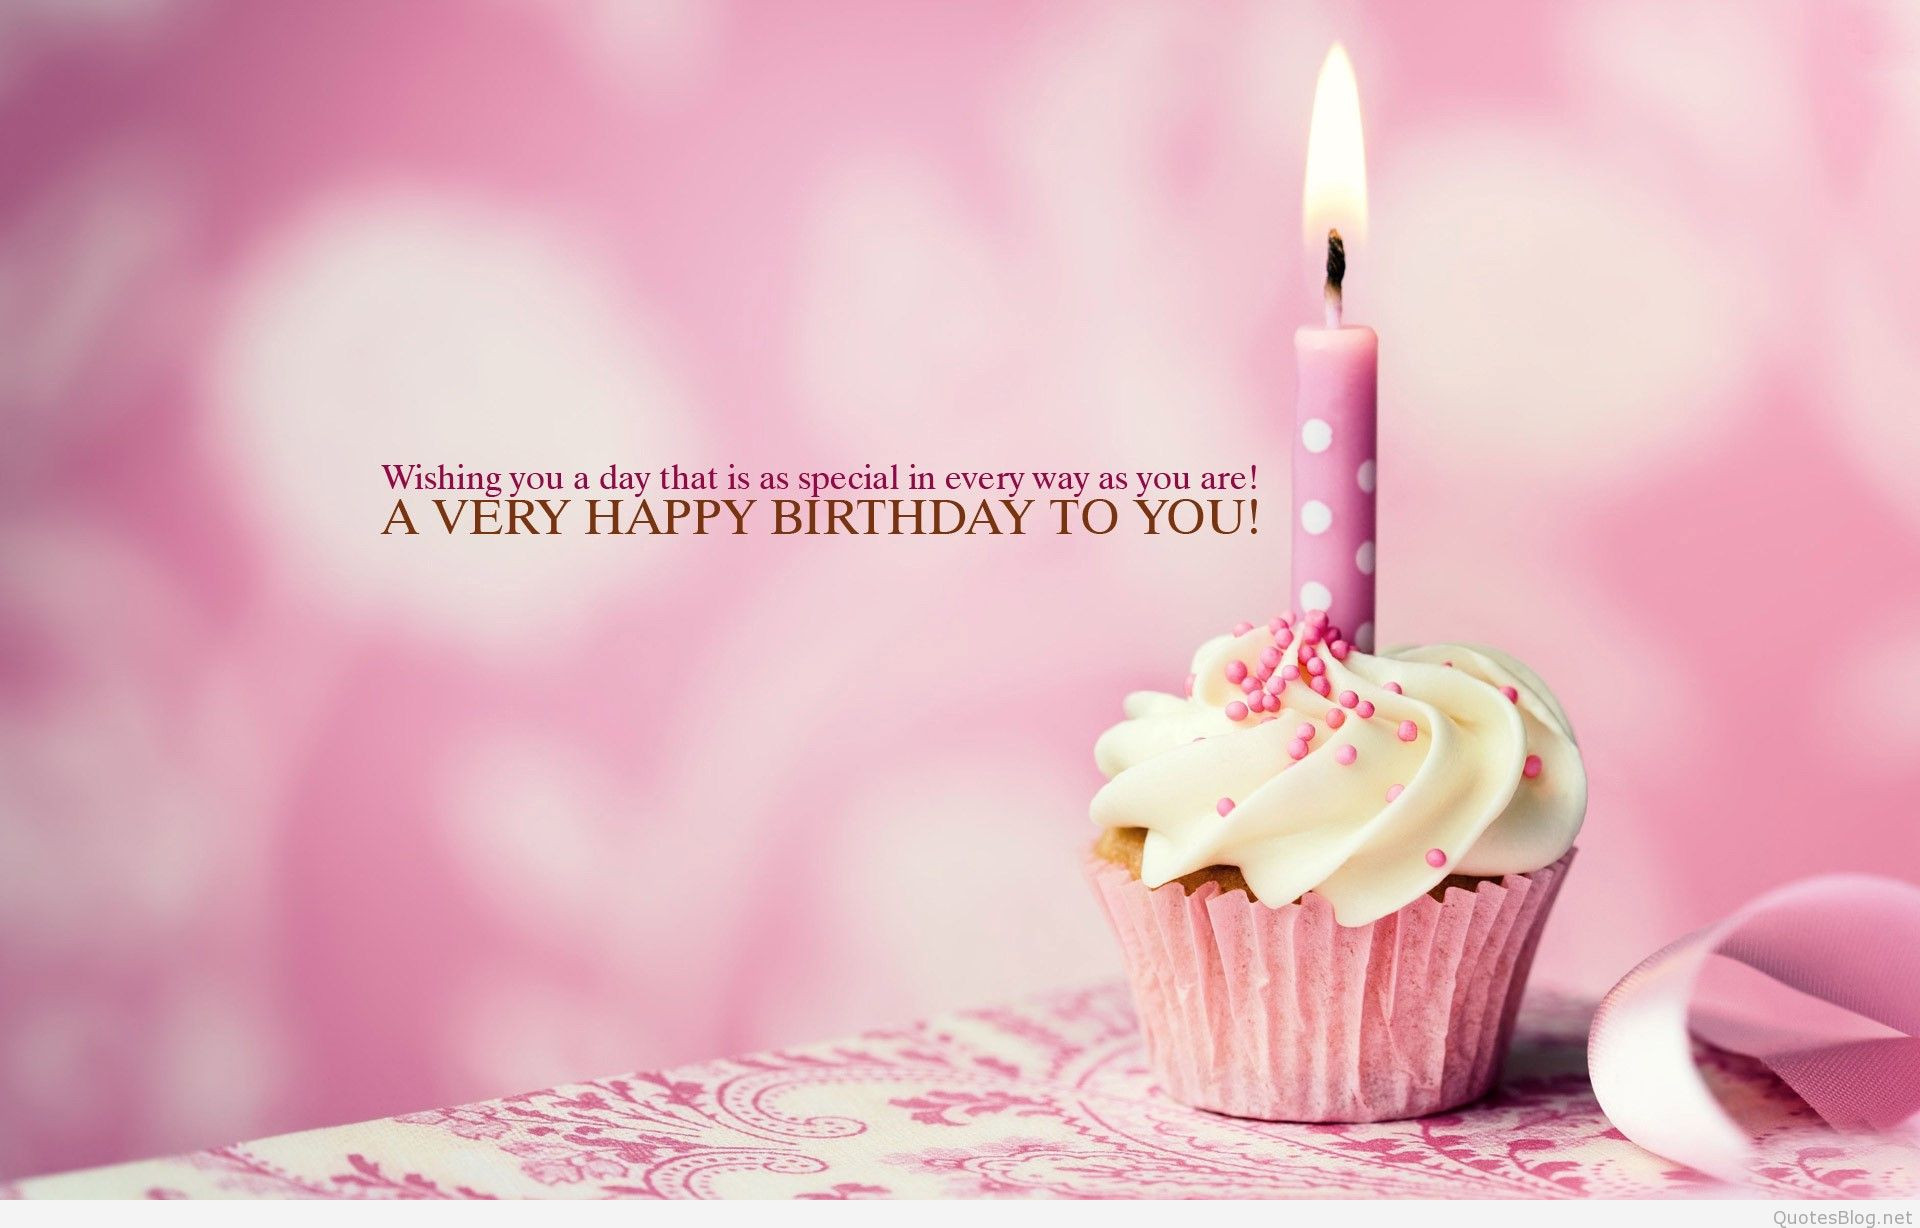 Wishing You A Happy Birthday Quotes
 2015 Happy birthday quotes and sayings on images